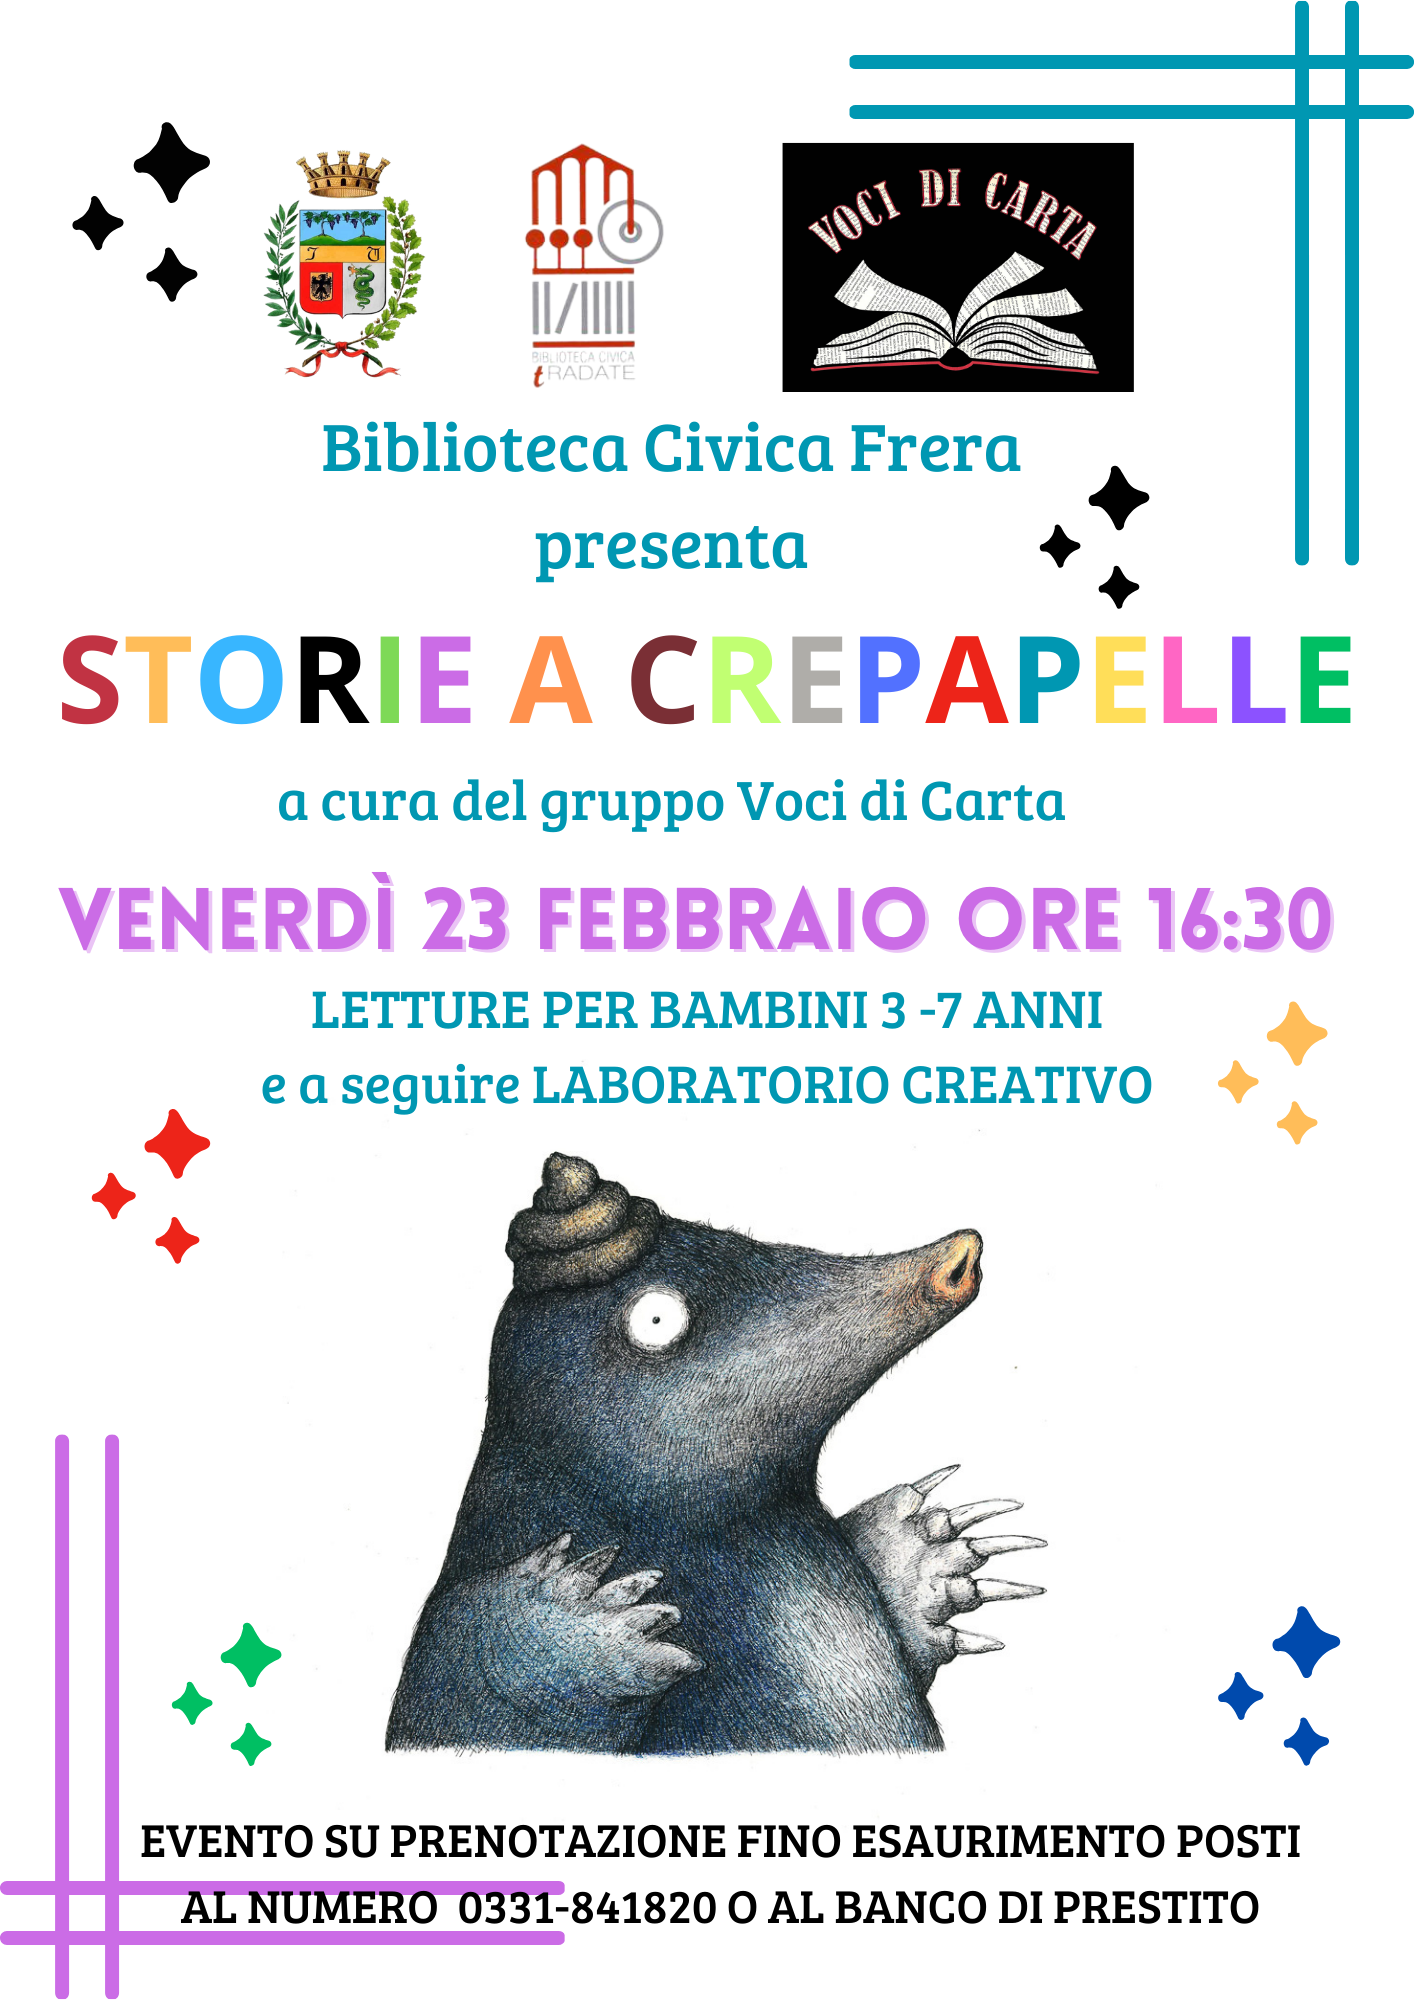 Storie a crepapelle